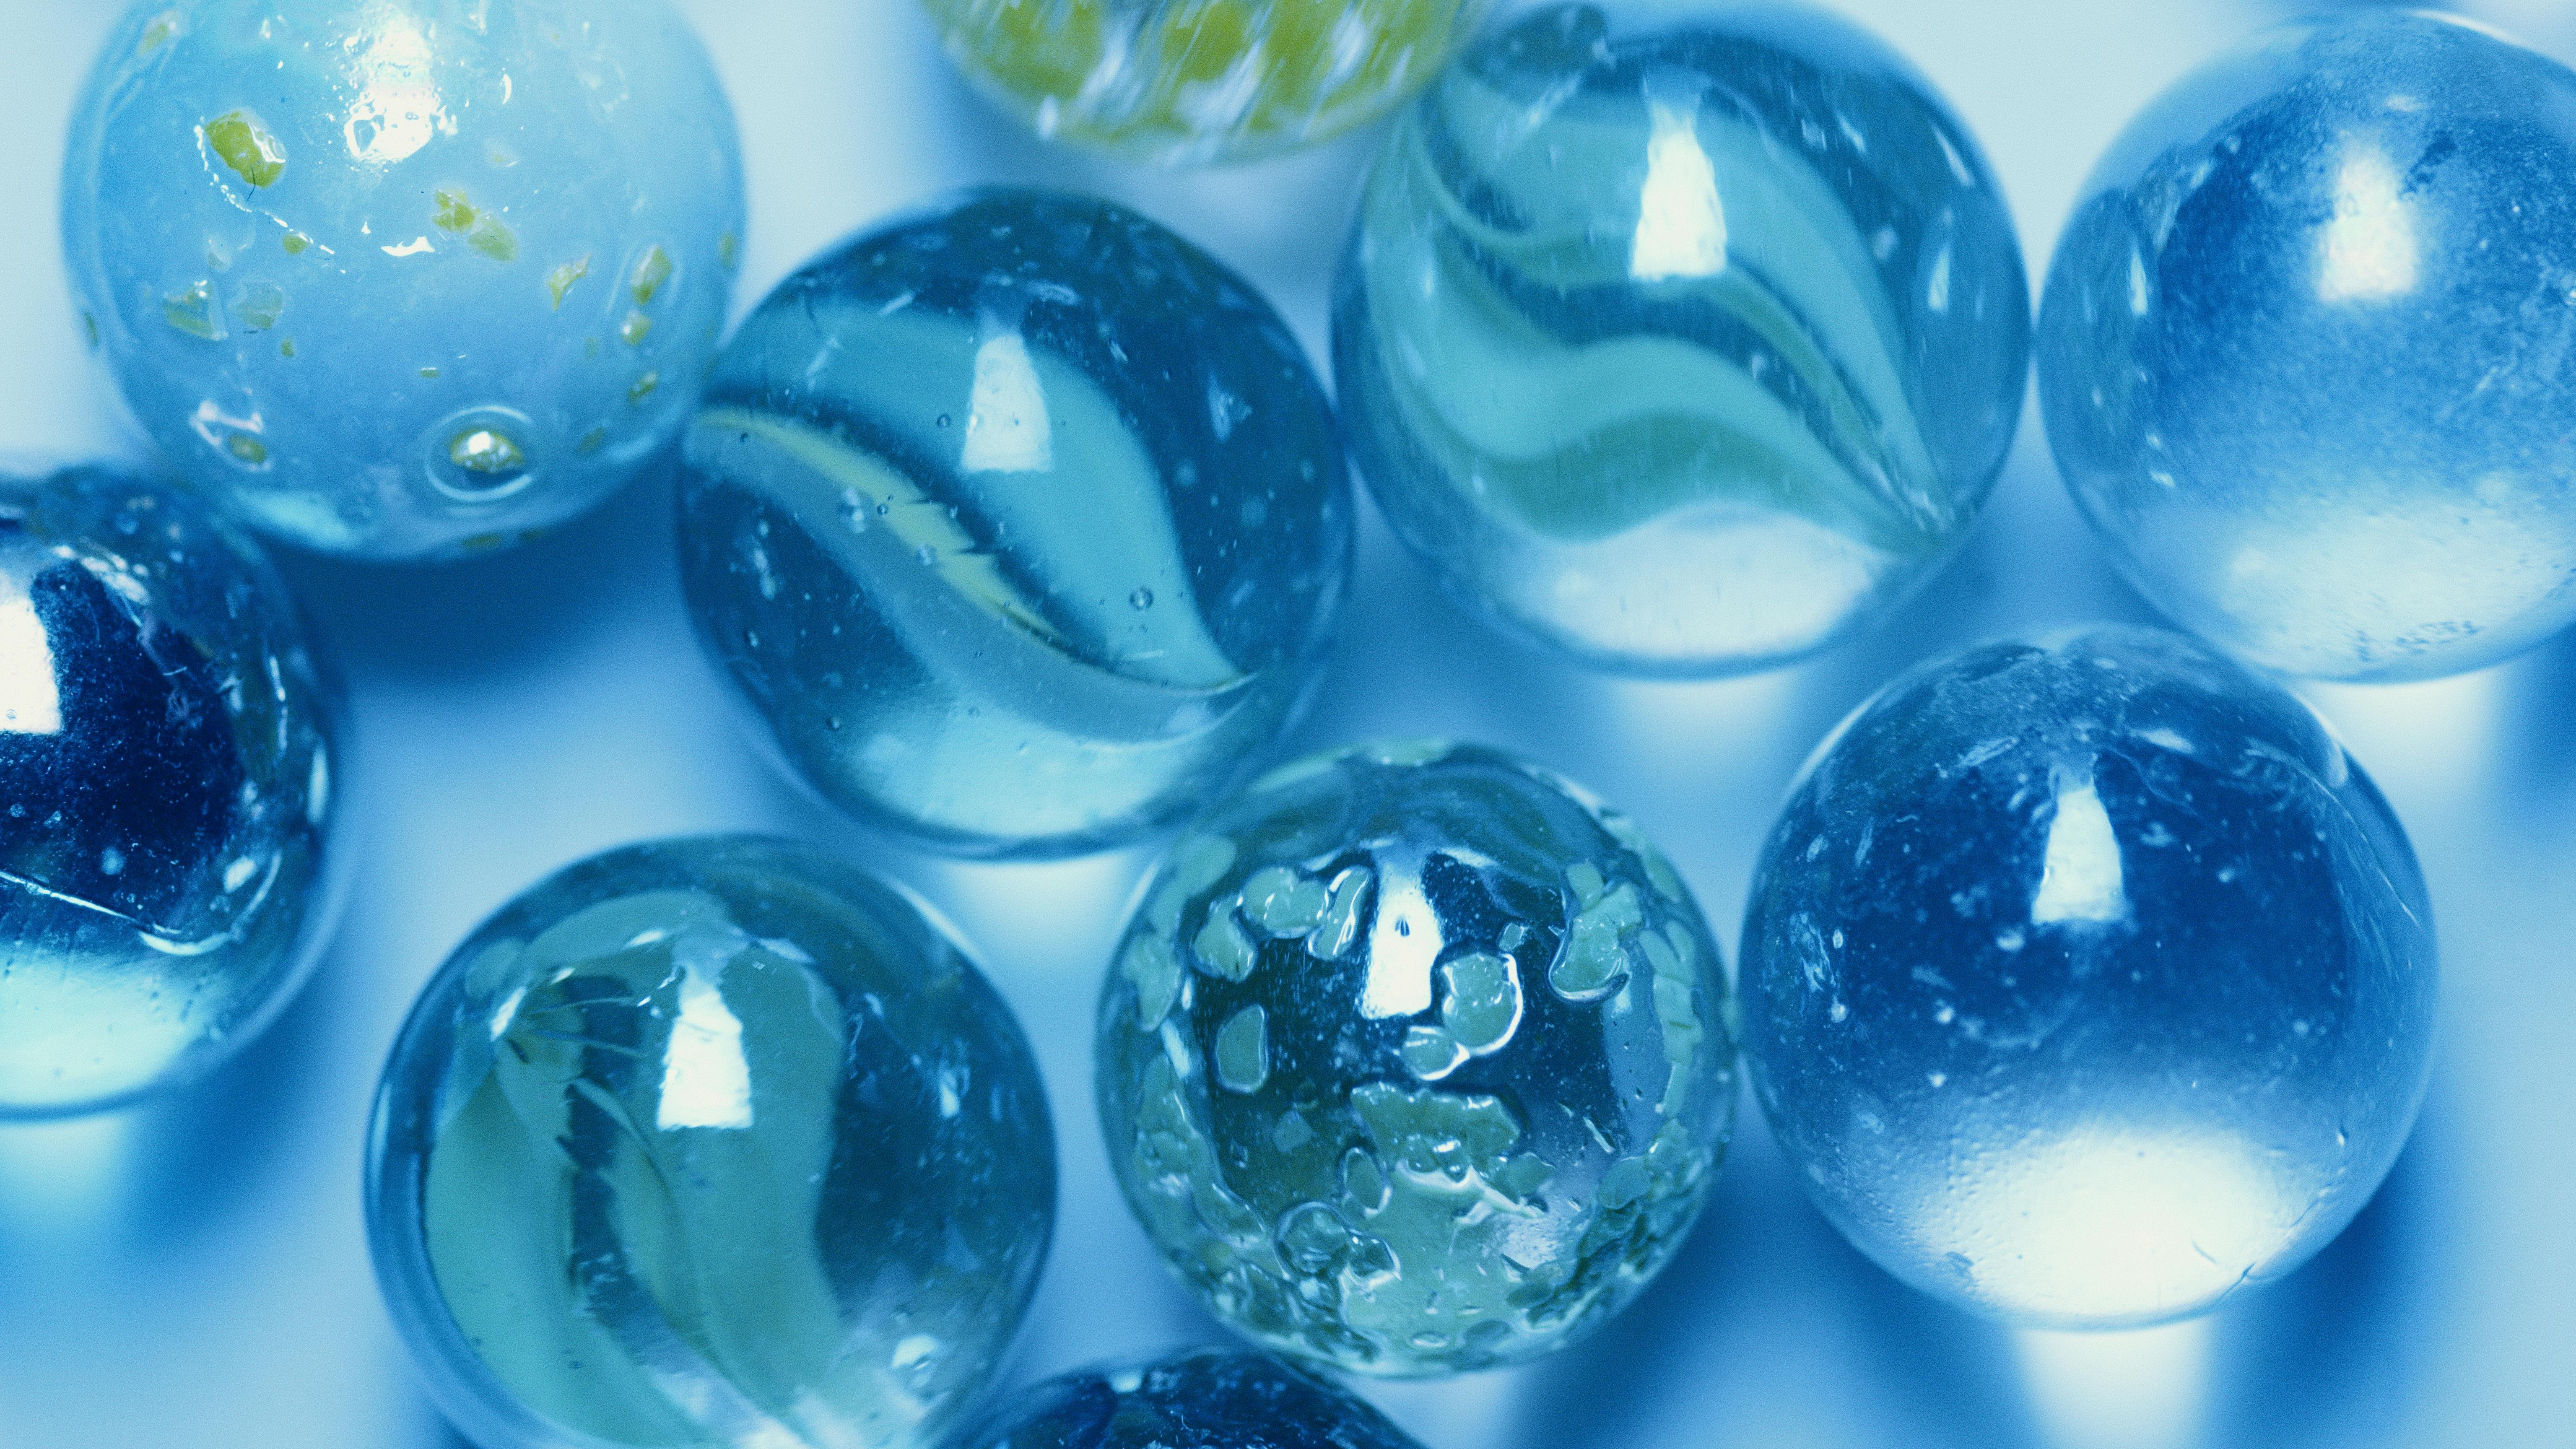 Blue glass marbles